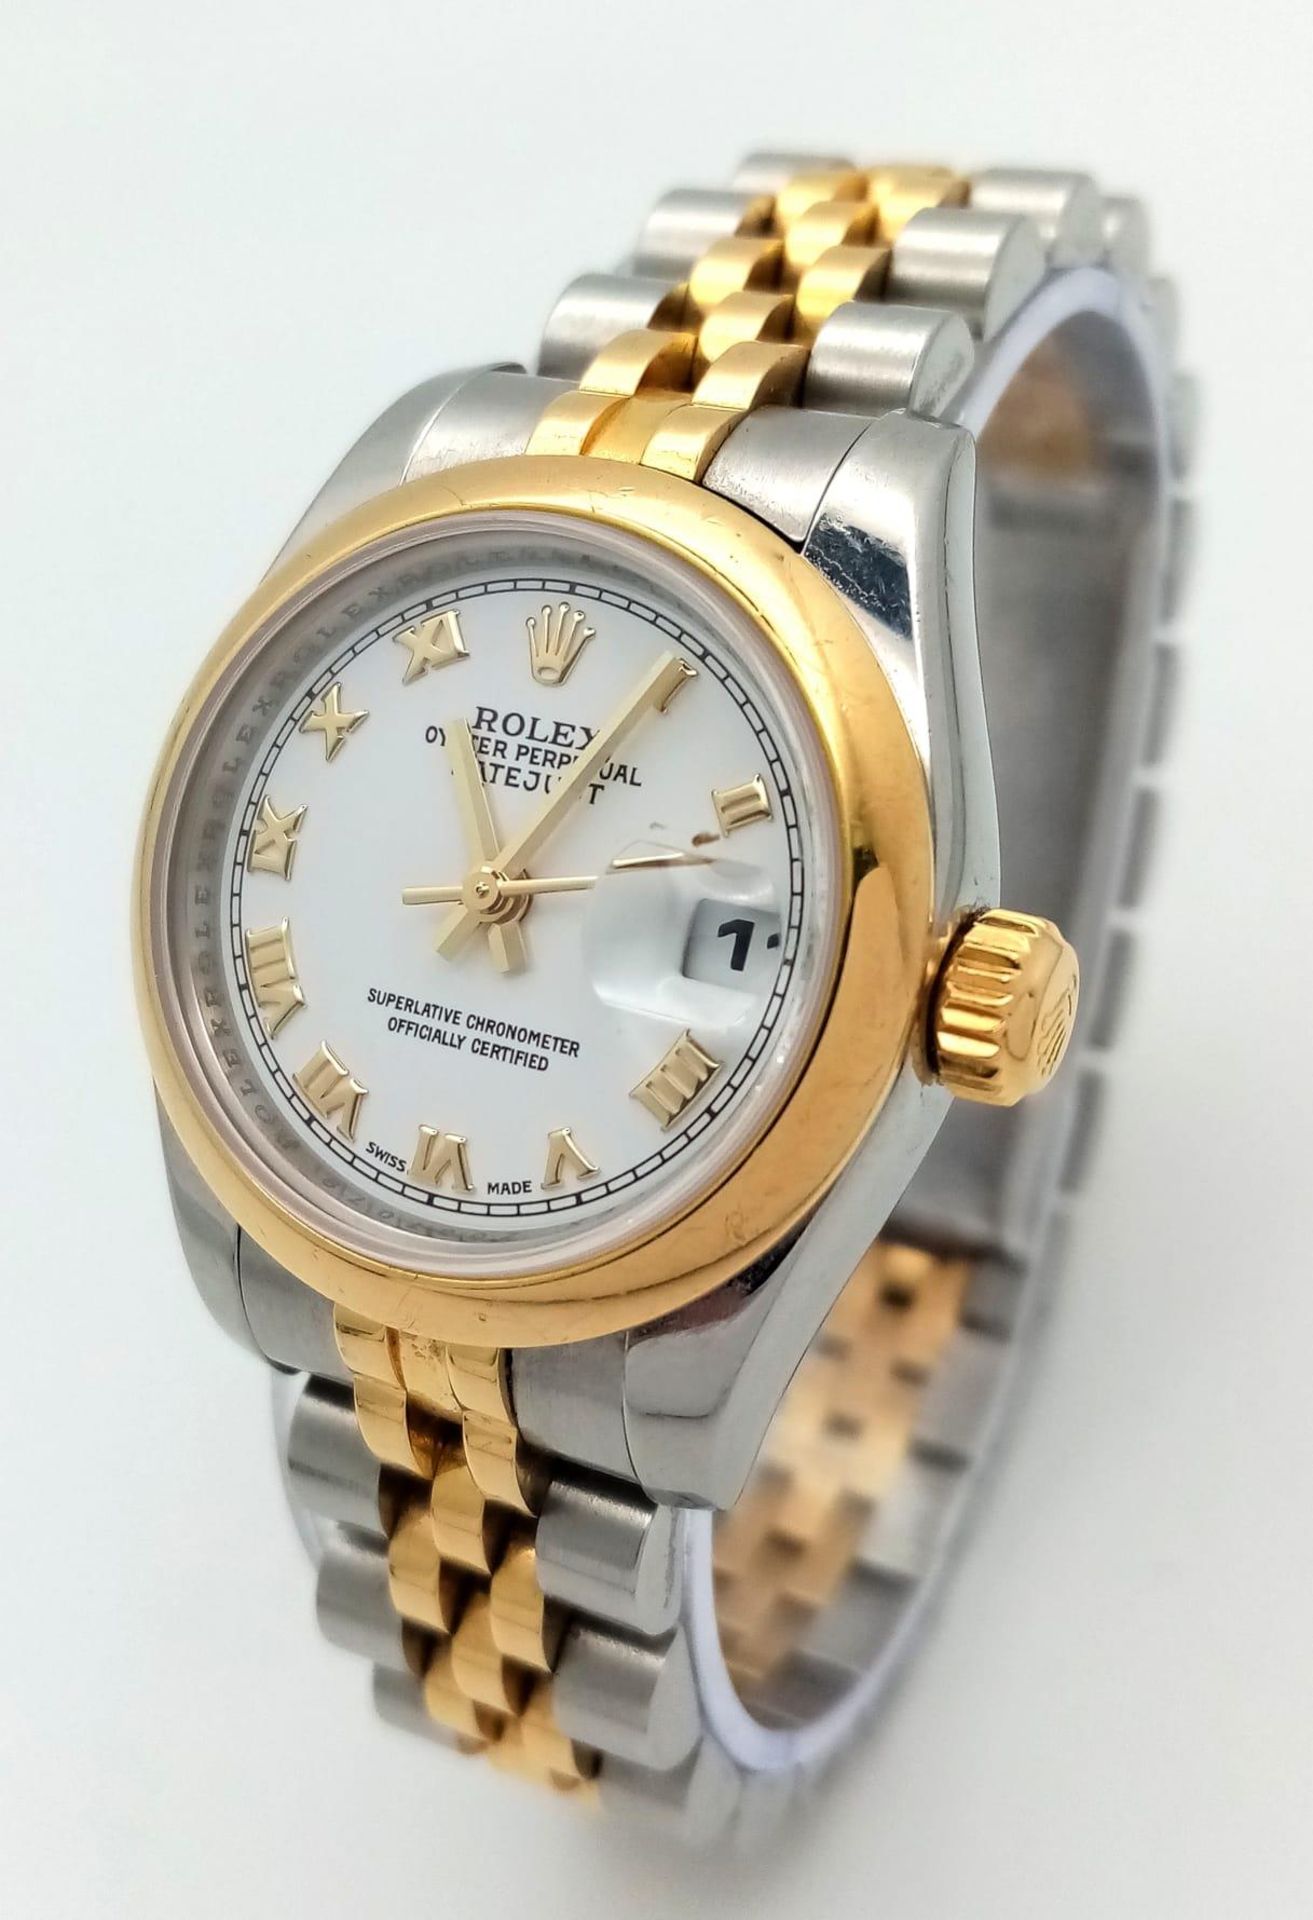 A Rolex Oyster Perpetual Datejust Bi-Metal Ladies Watch. 18k gold and stainless steel bracelet and